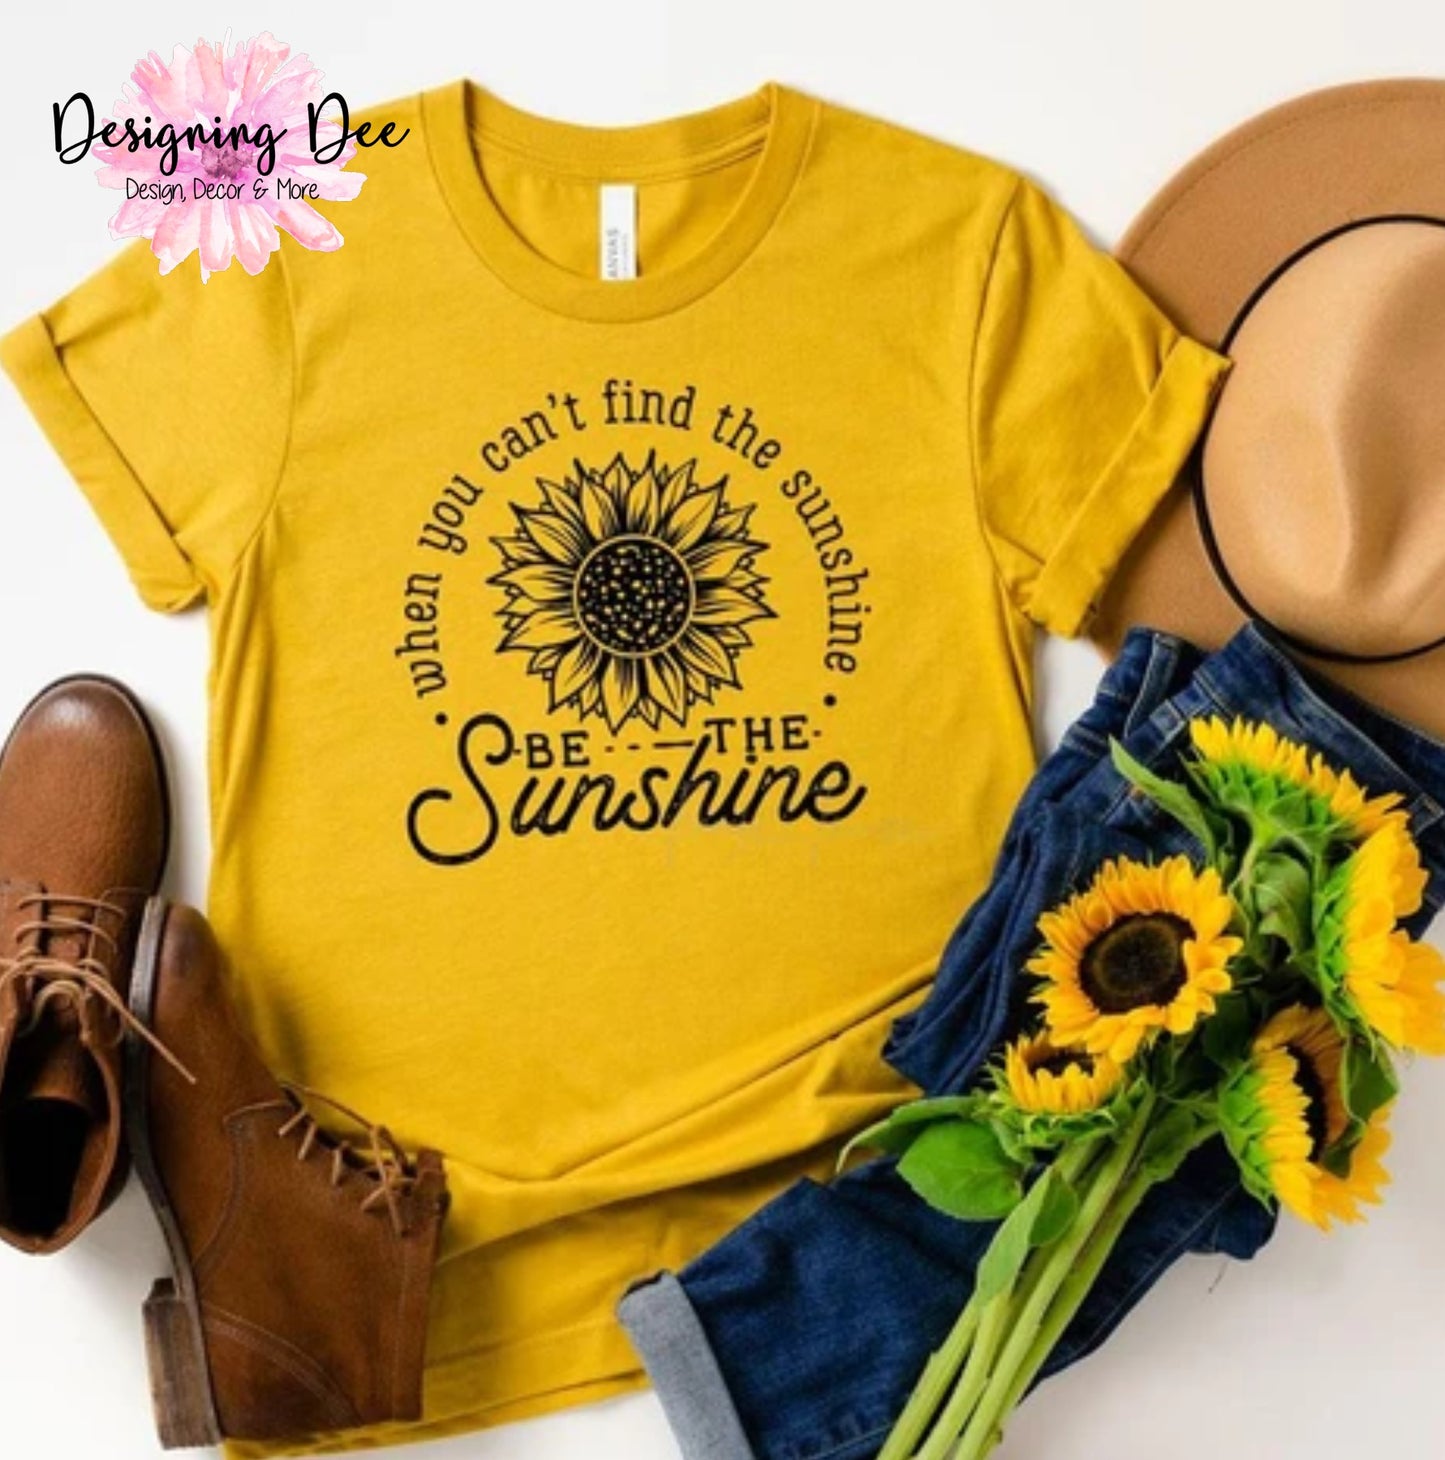 When You Can't Find the Sunshine, Be the Sunshine Women's Inspirational T-Shirt,